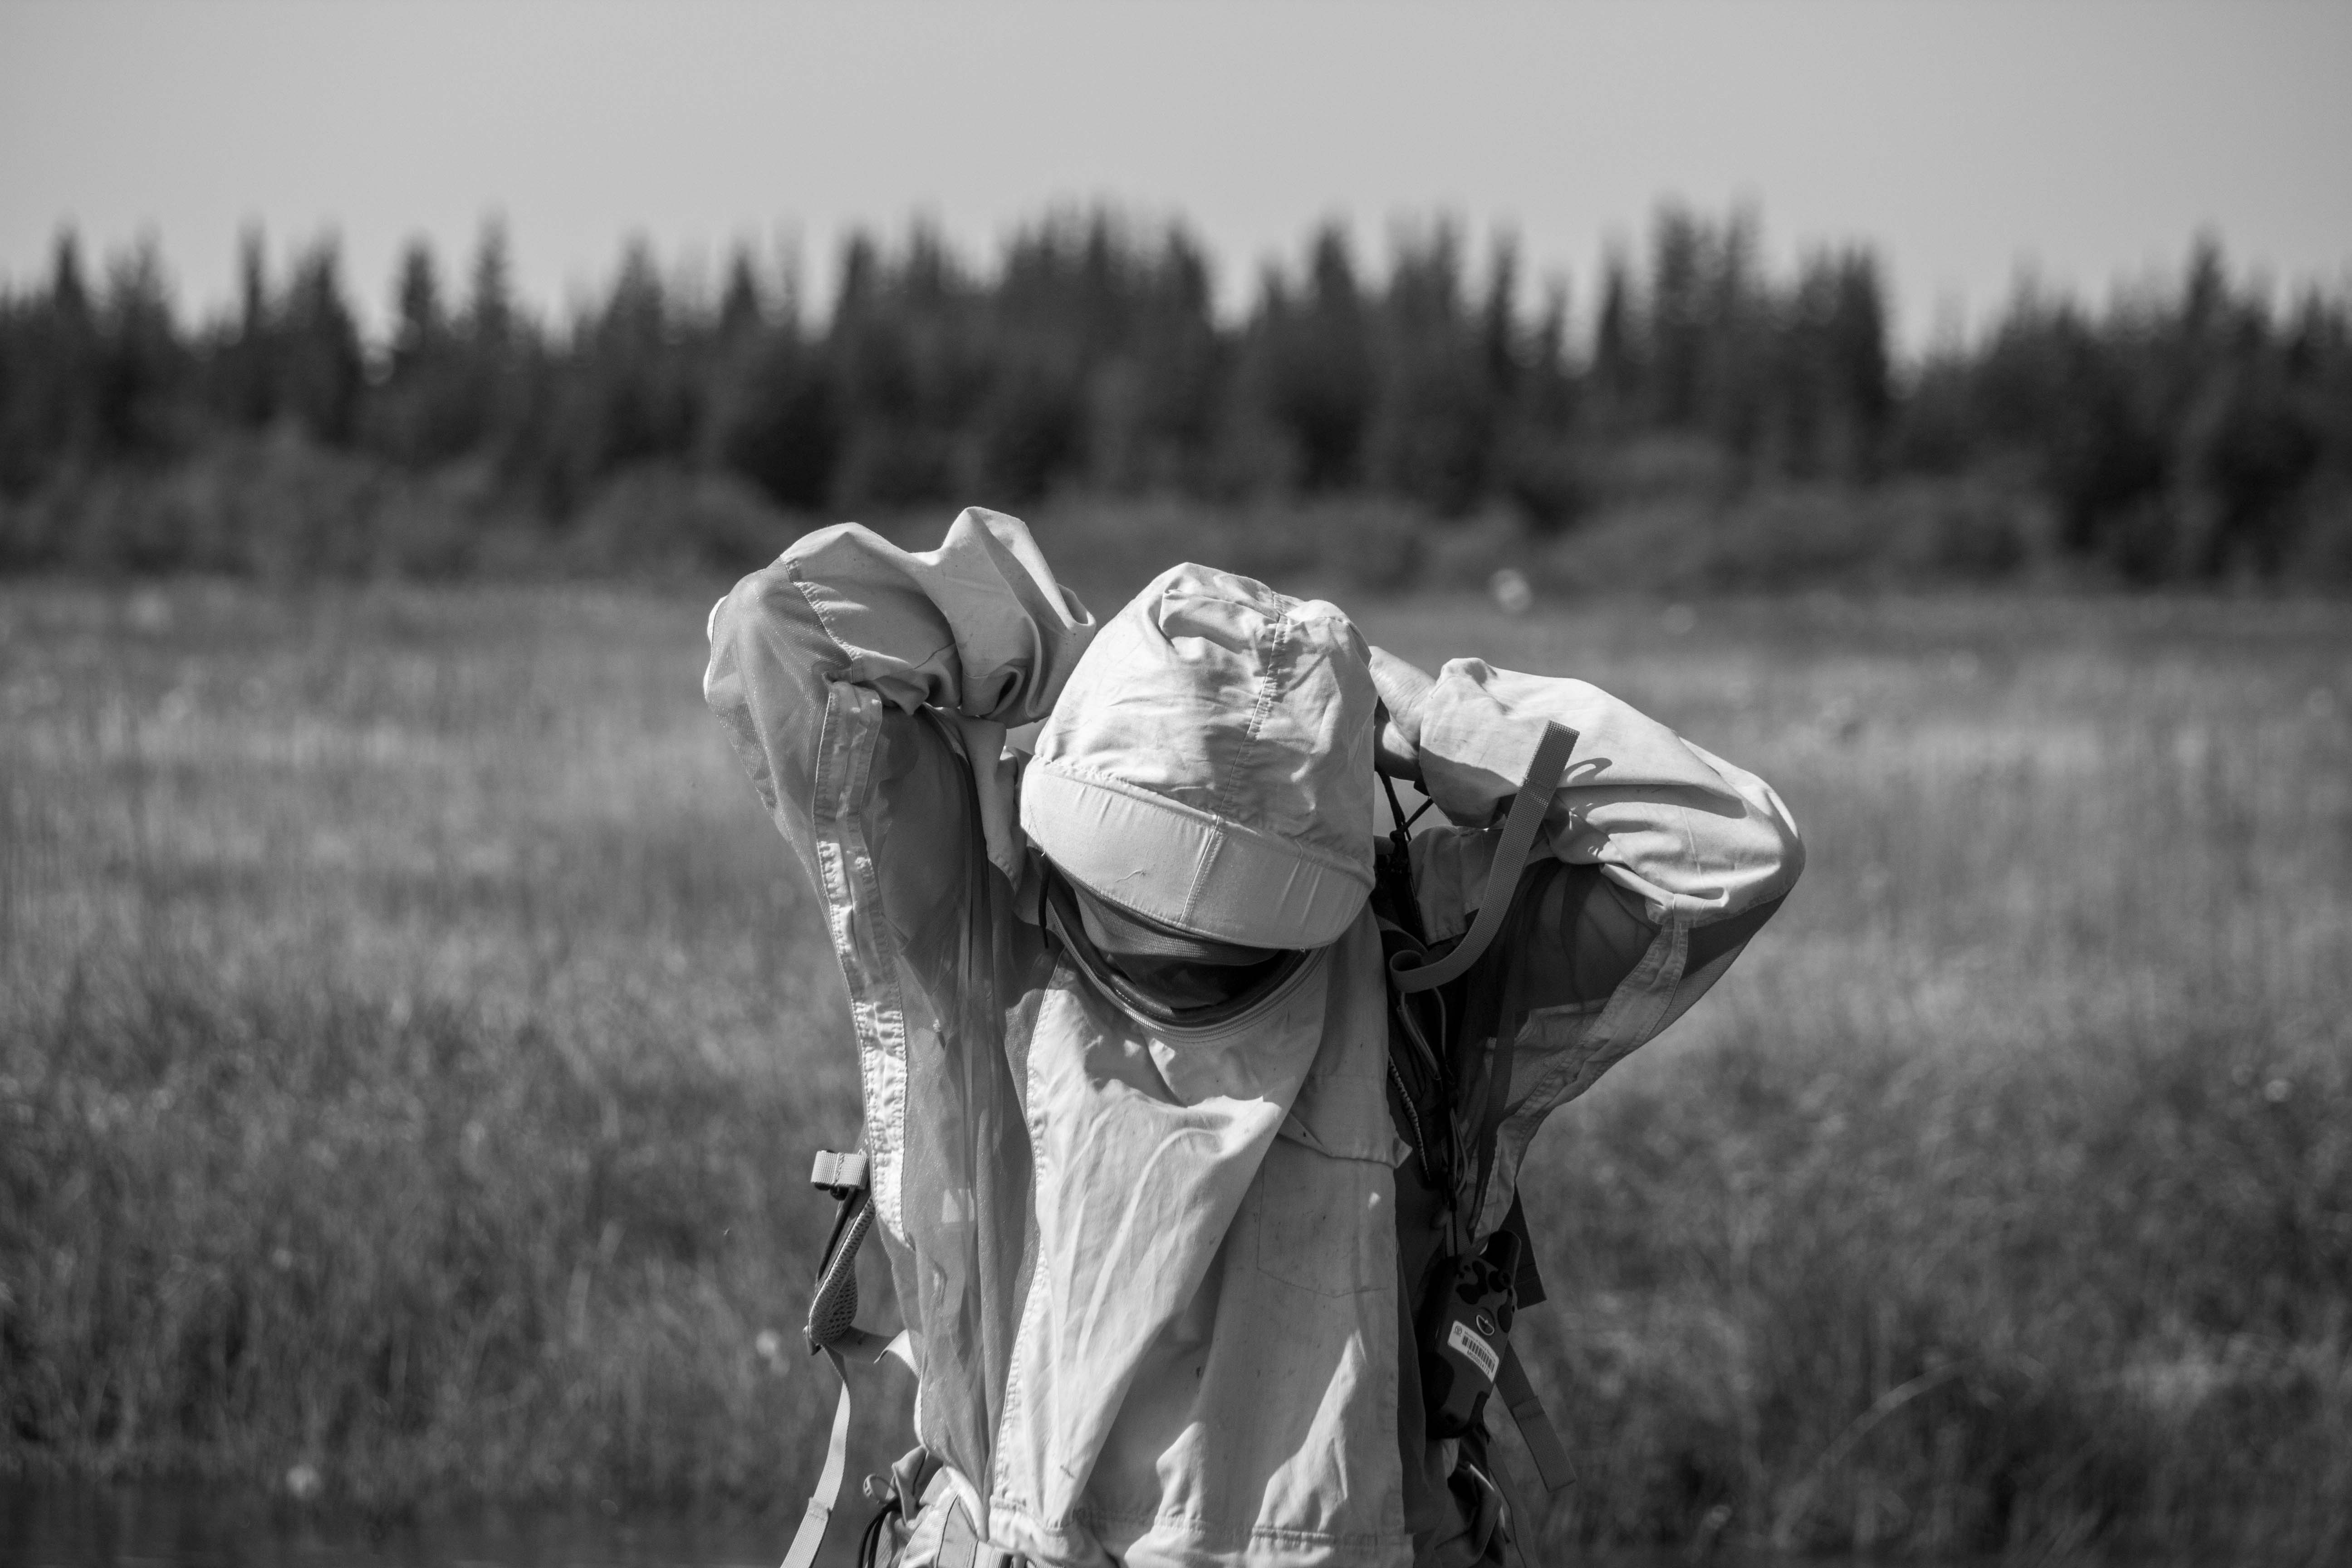 Emelie puts on her bug jacket in the field to keep off the mosquitoes.